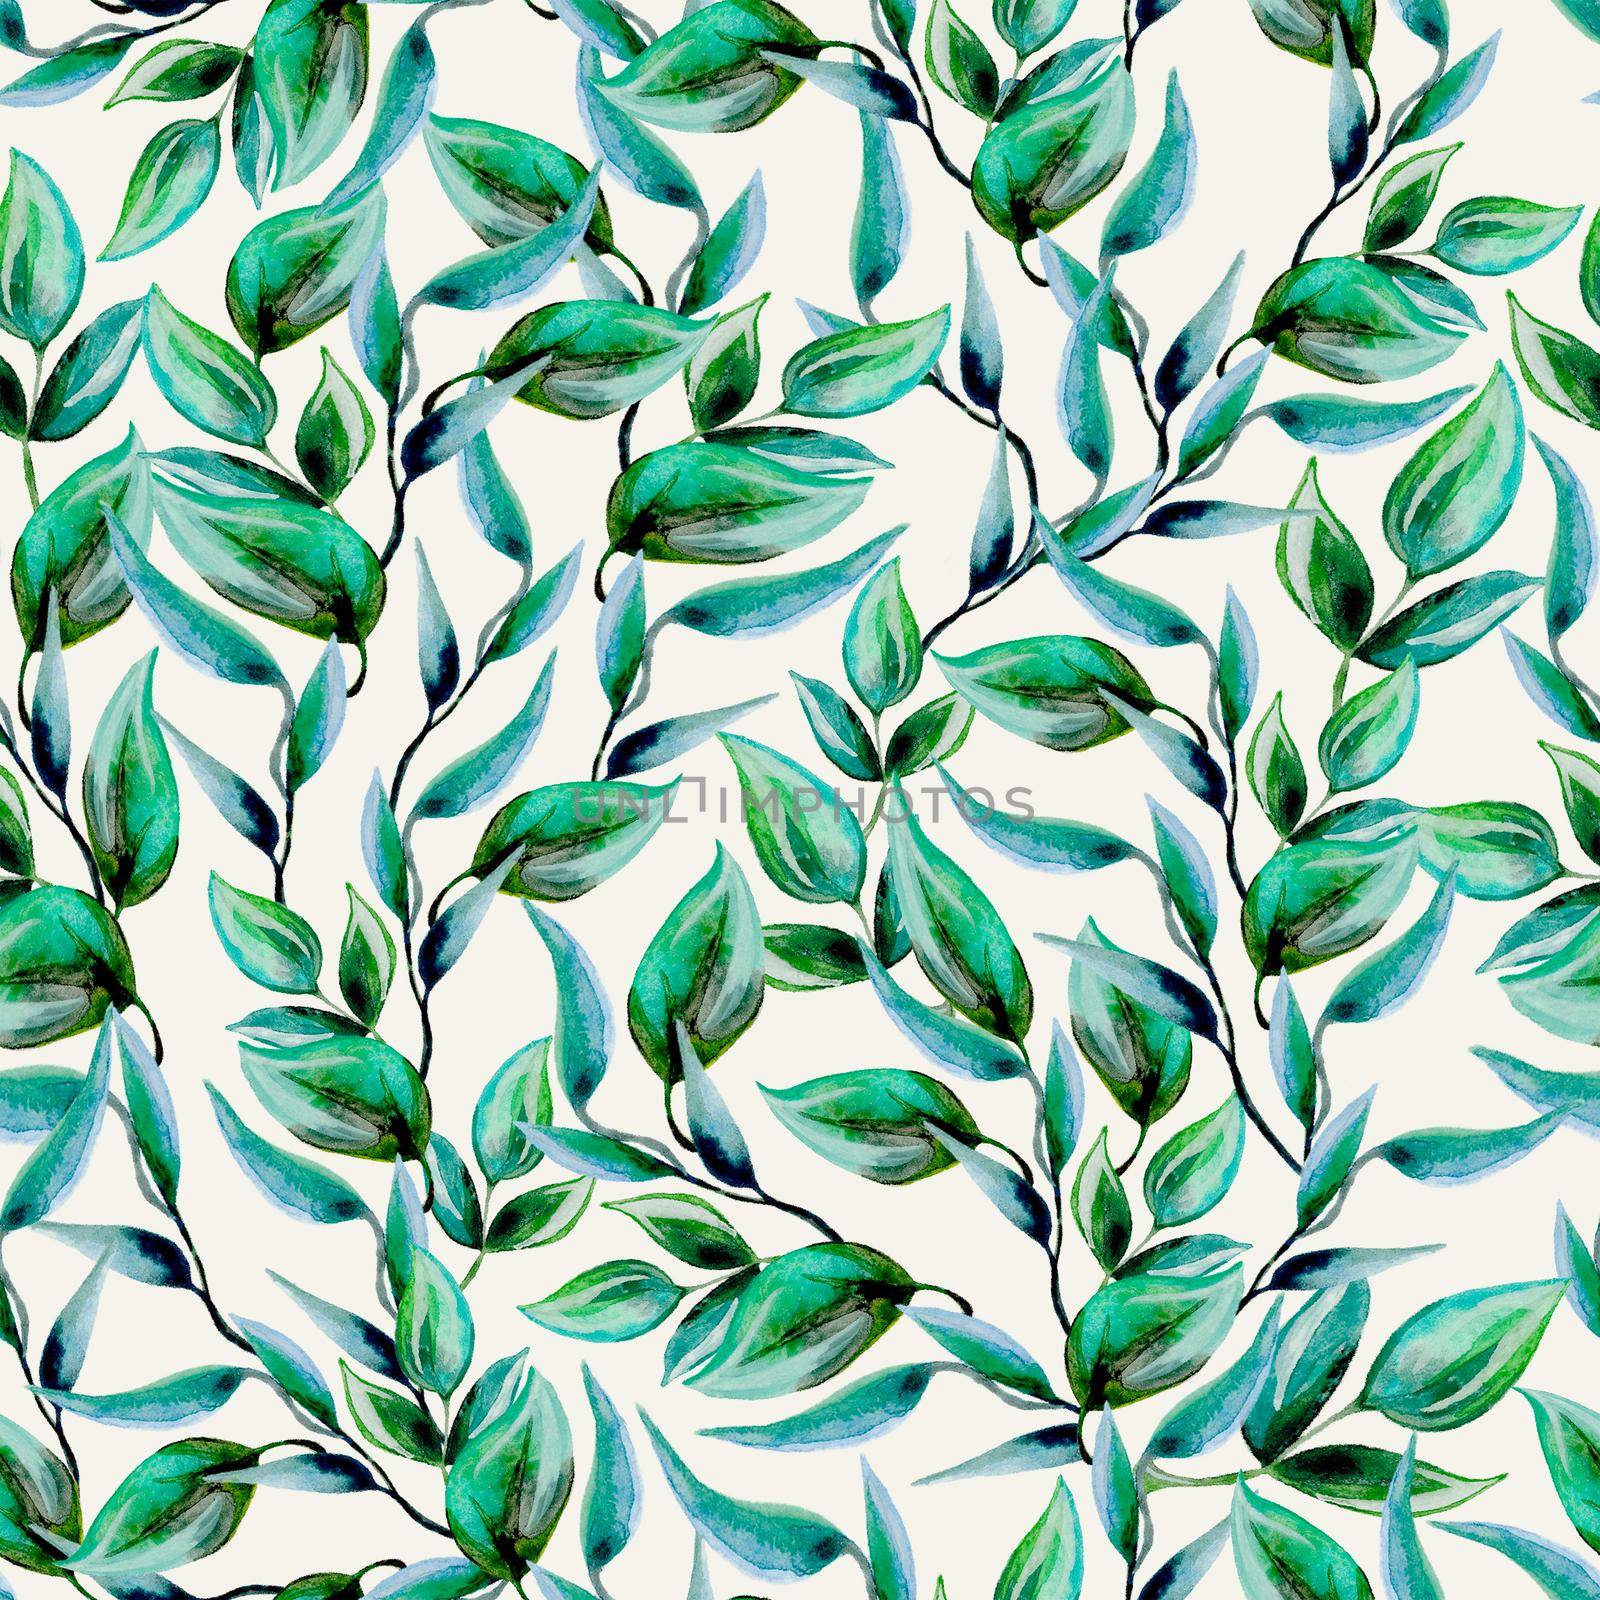 Green leaves watercolor texture pattern. Hand drawn illustration by fireFLYart